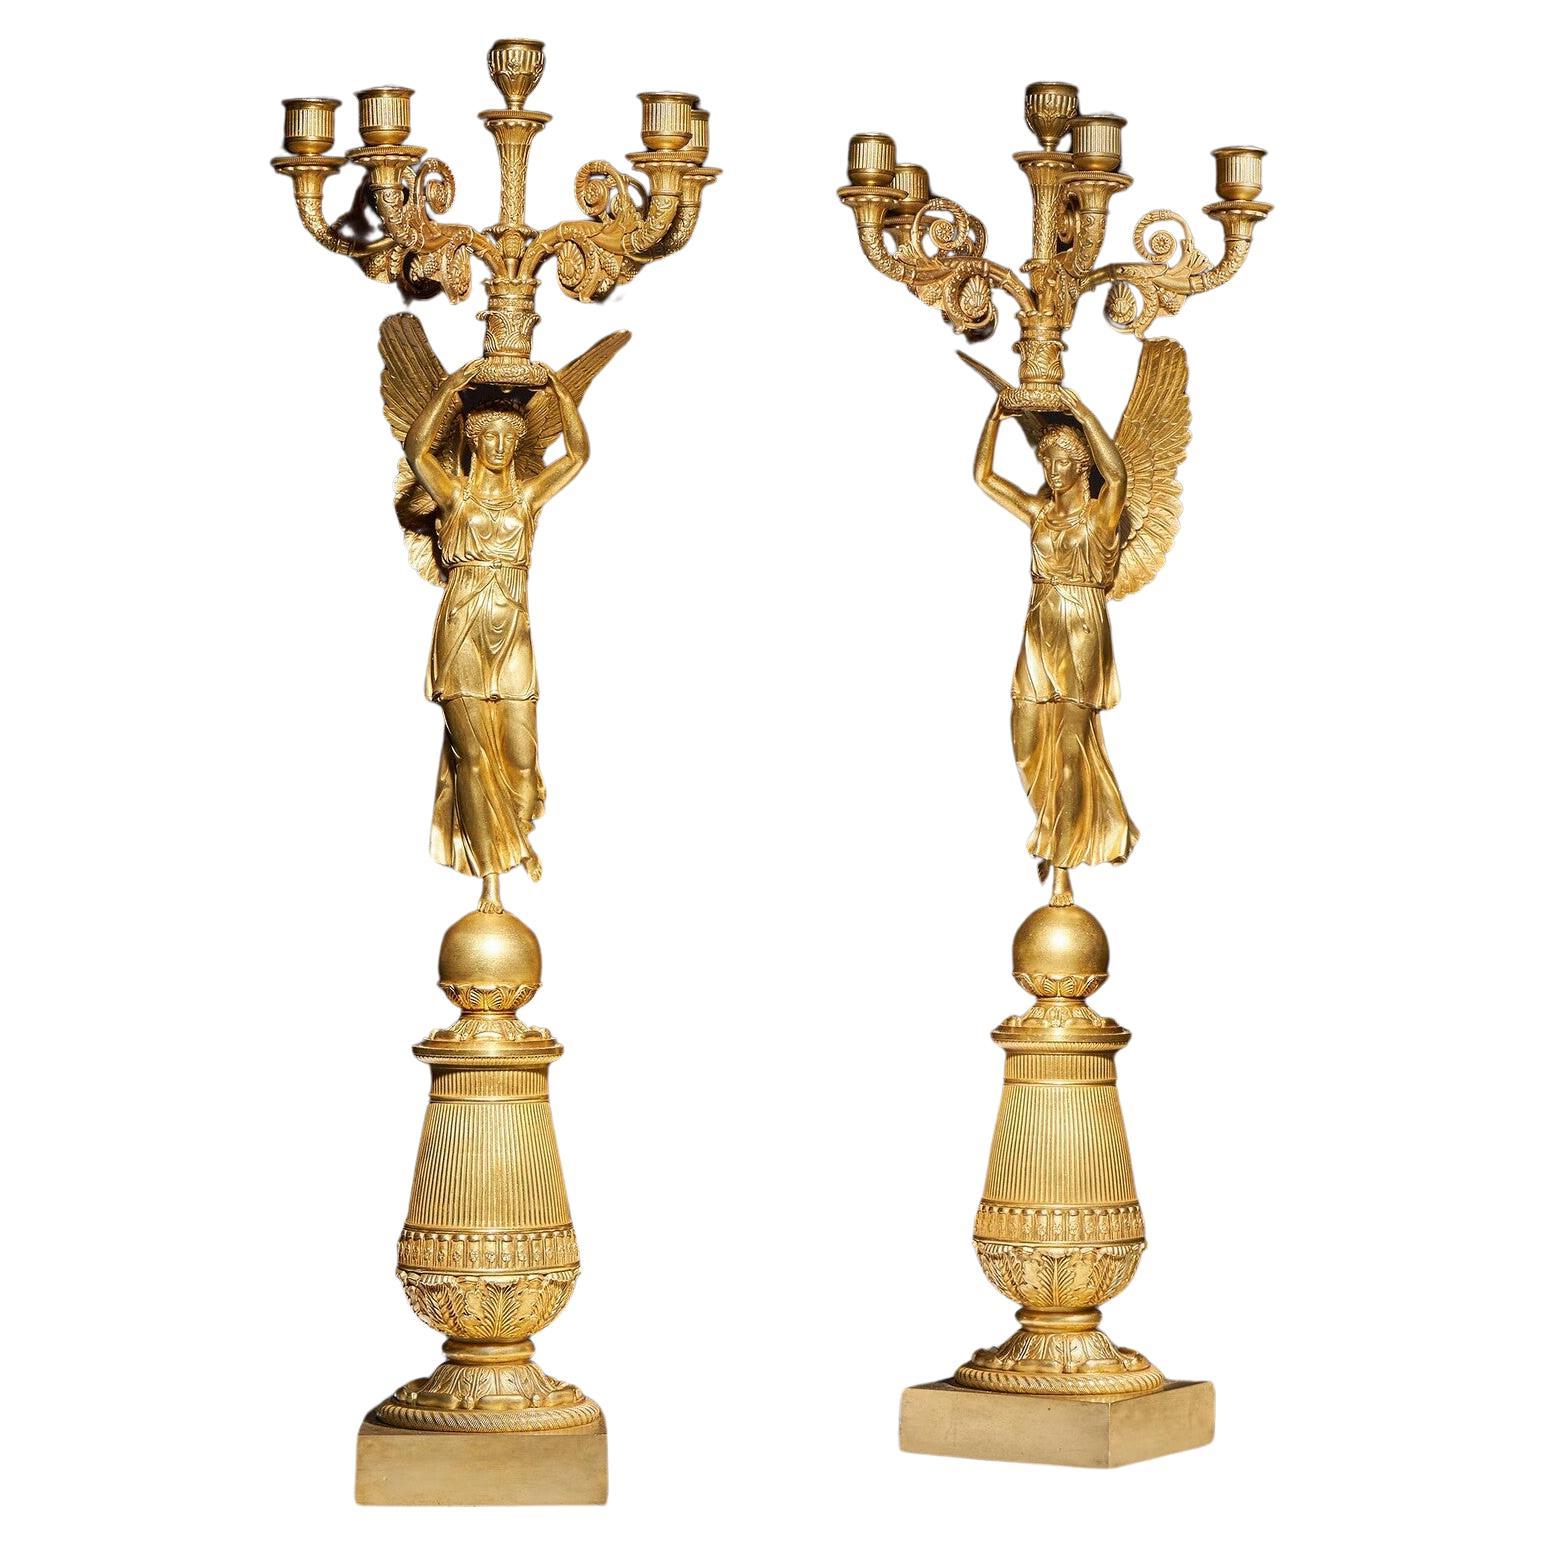 Exceptional Pair of French Late Empire Gilt-bronze Candelabra Attributed to Pier For Sale